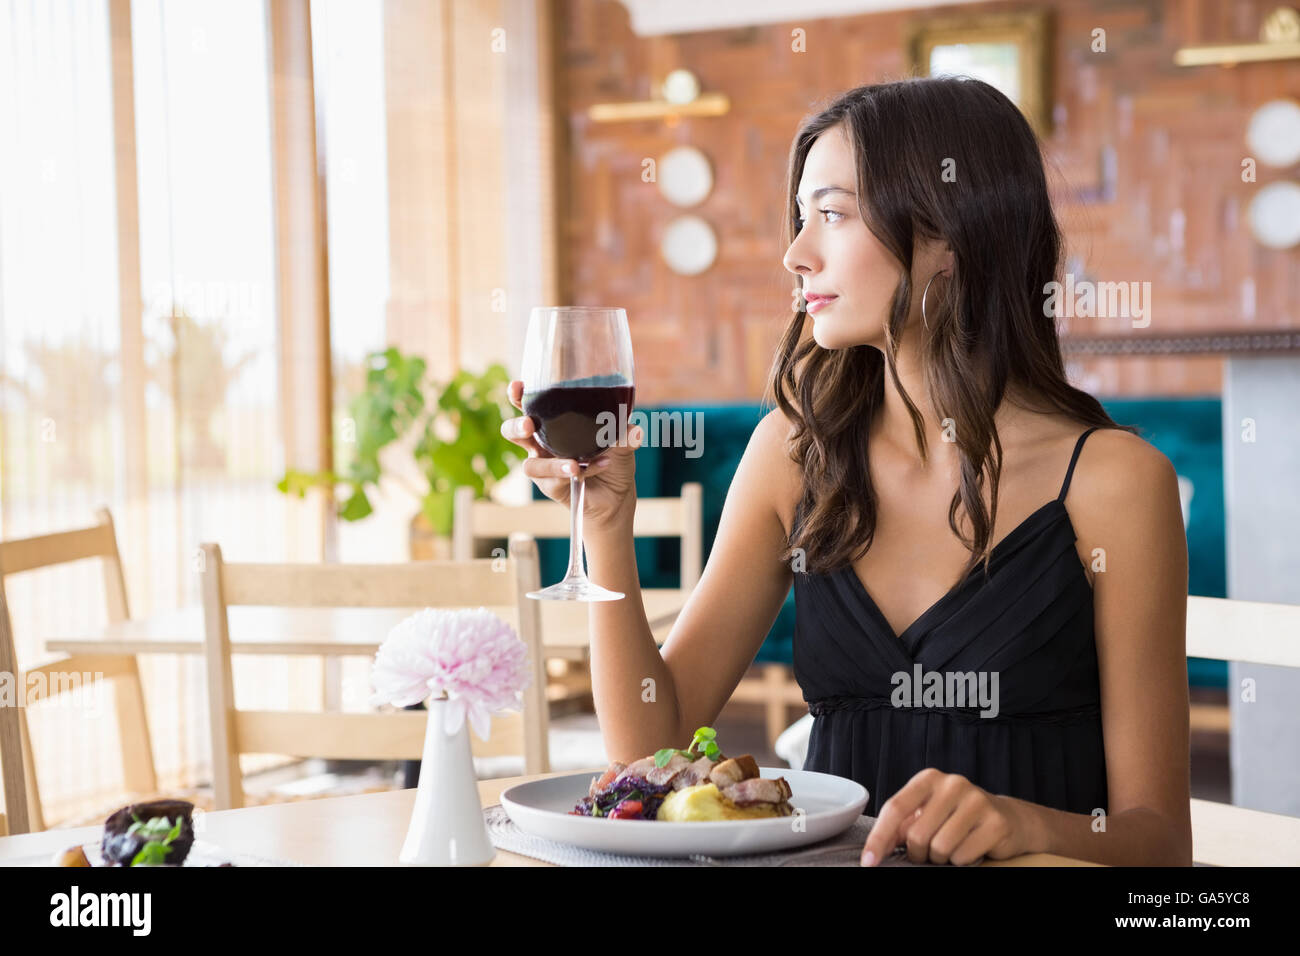 Beautiful woman having wine with meal Stock Photo